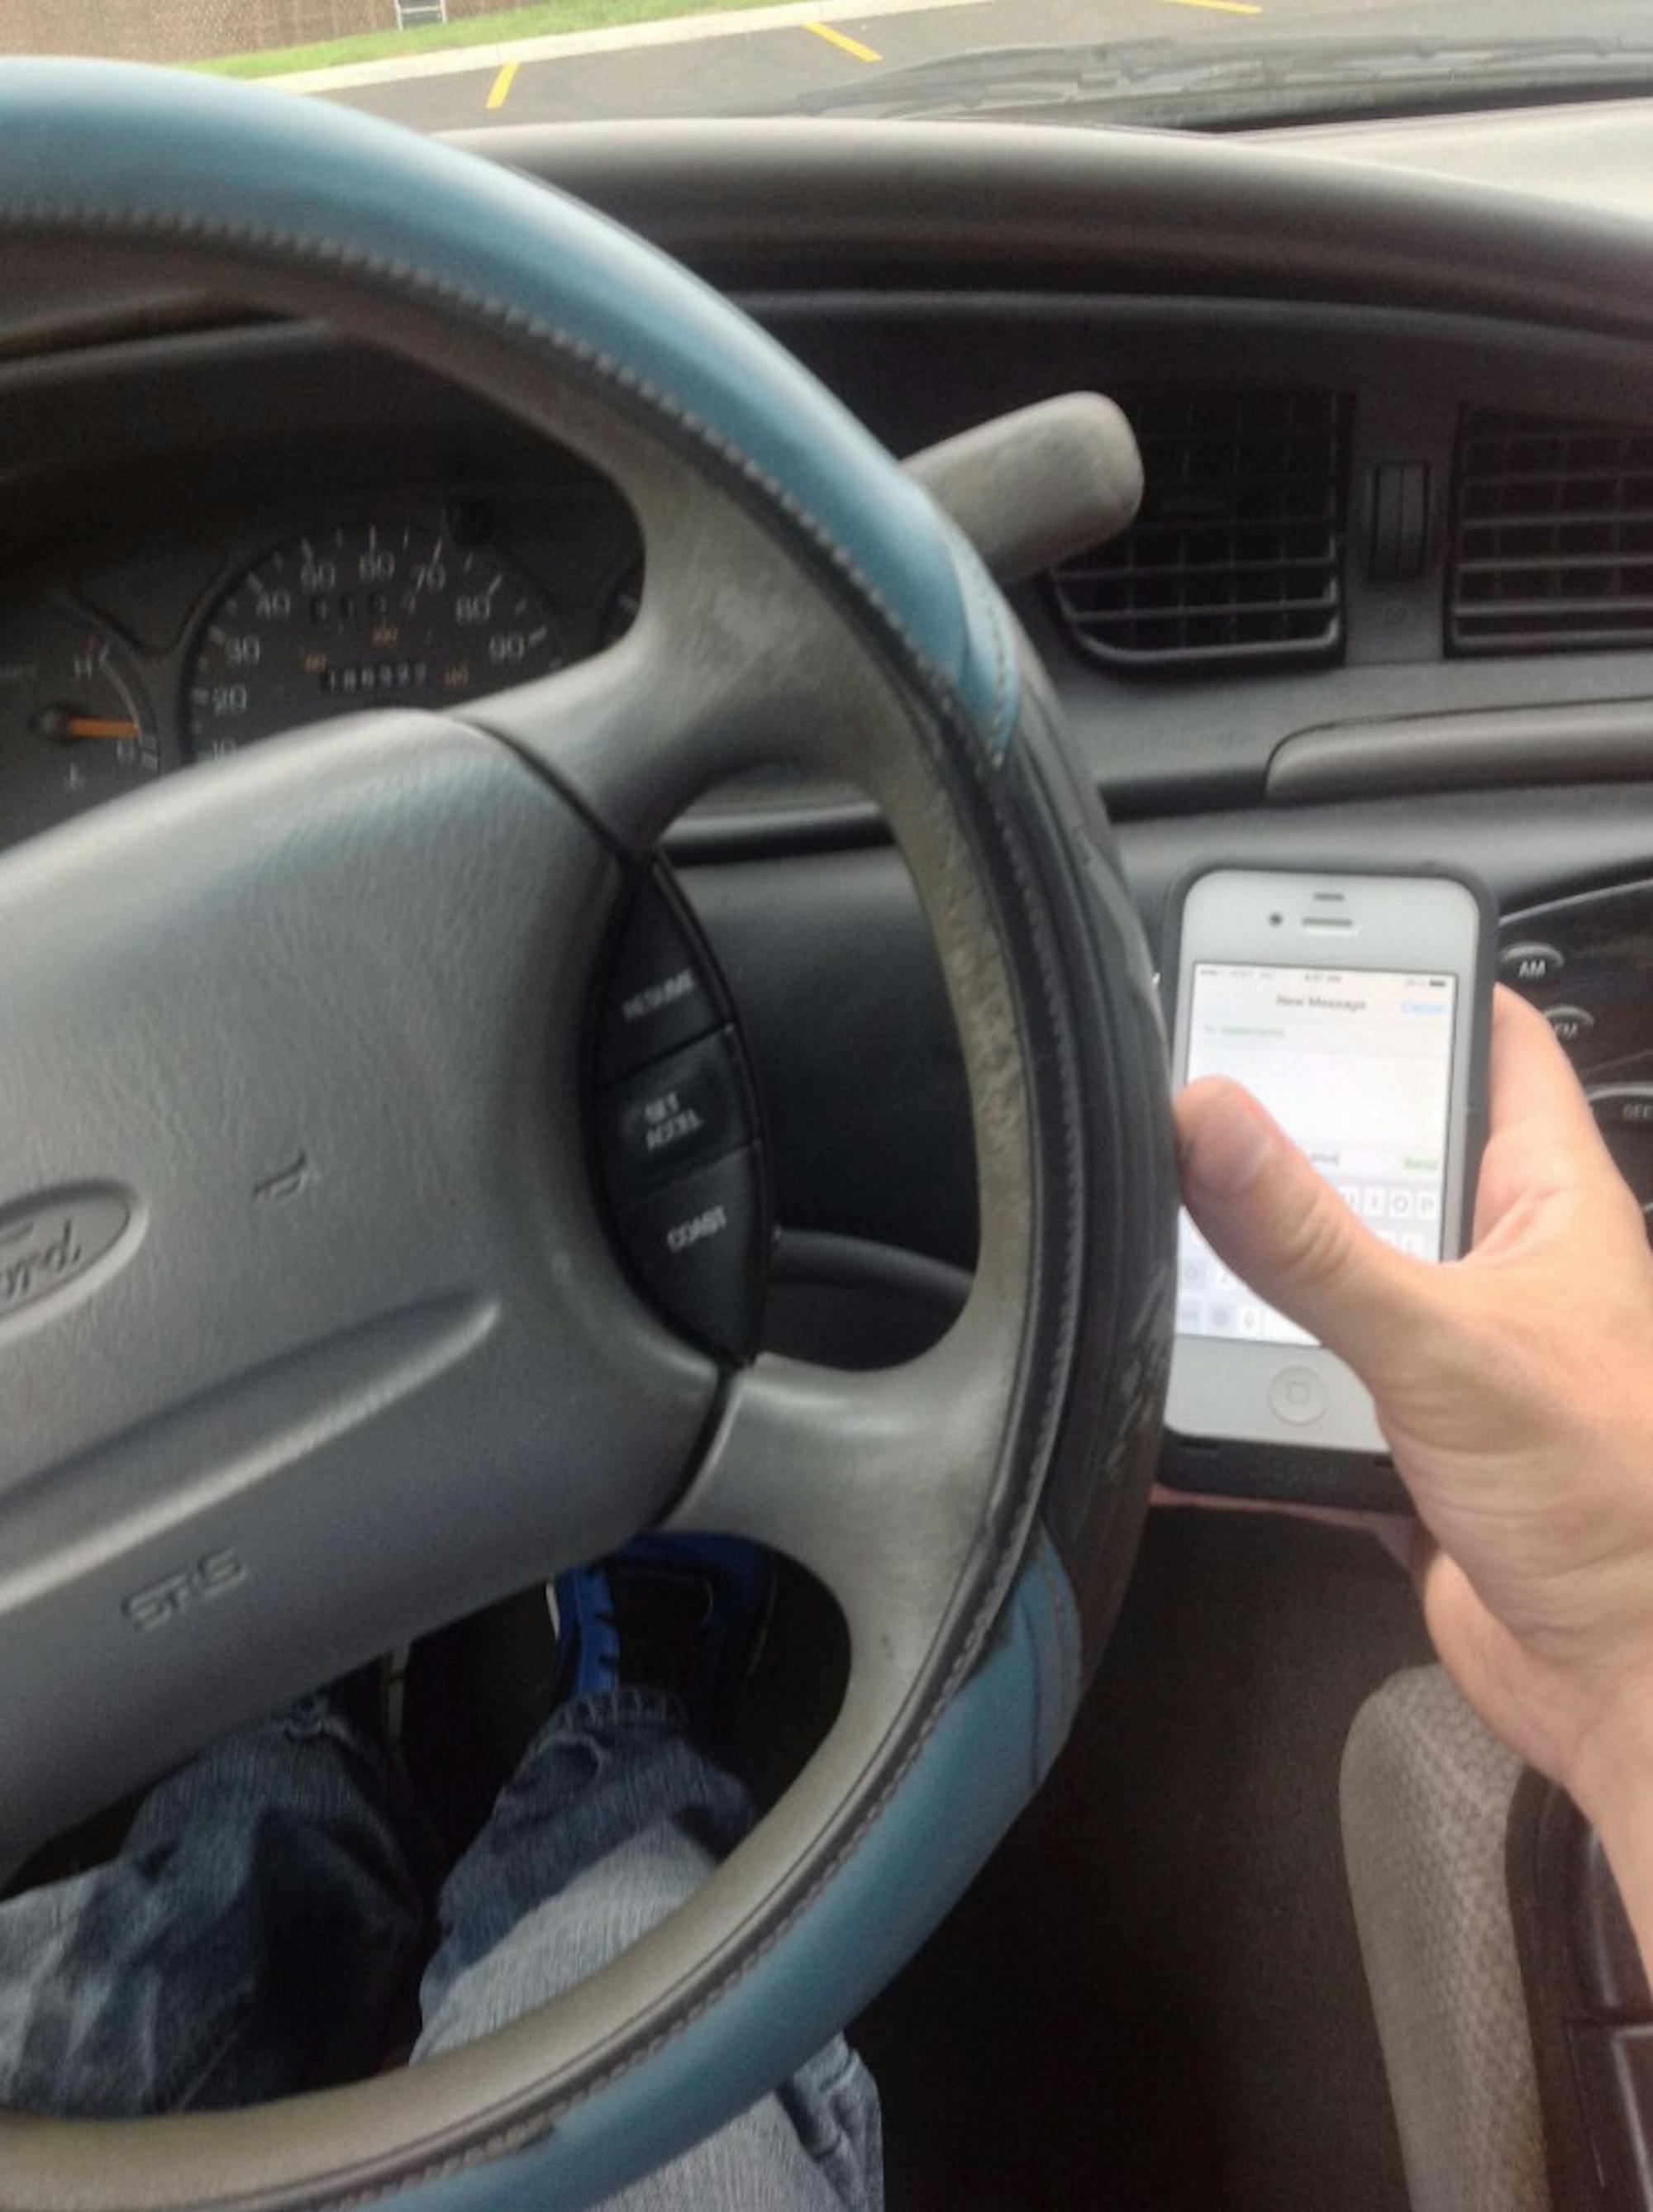 	According to Washtenaw County’s website, “Texting and driving makes you 23 times more likely to be in an accident.”